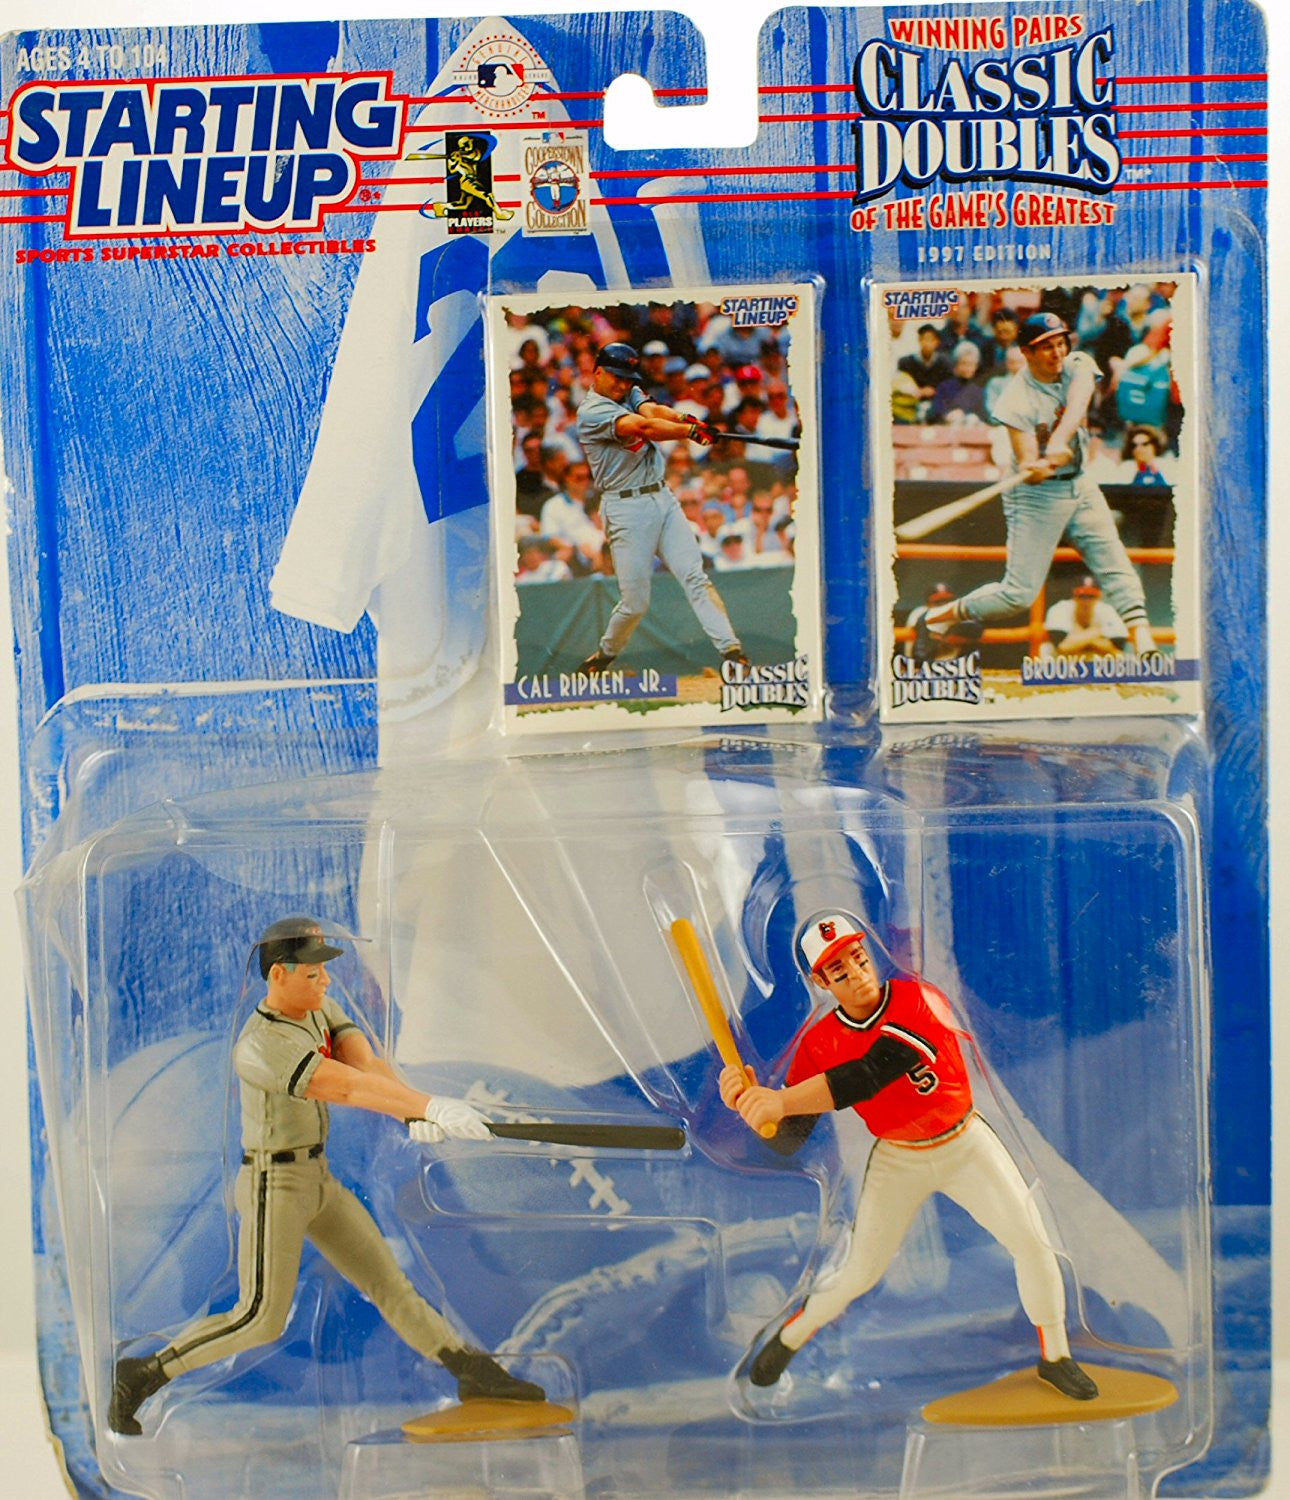 CAL RIPKEN JR. / BALTIMORE ORIOLES & BROOKS ROBINSON / BALTIMORE ORIOLES 1998 MLB Classic Doubles * Winning Pairs Series * Starting Lineup Action Figures & 2 Exclusive Collector Trading Cards